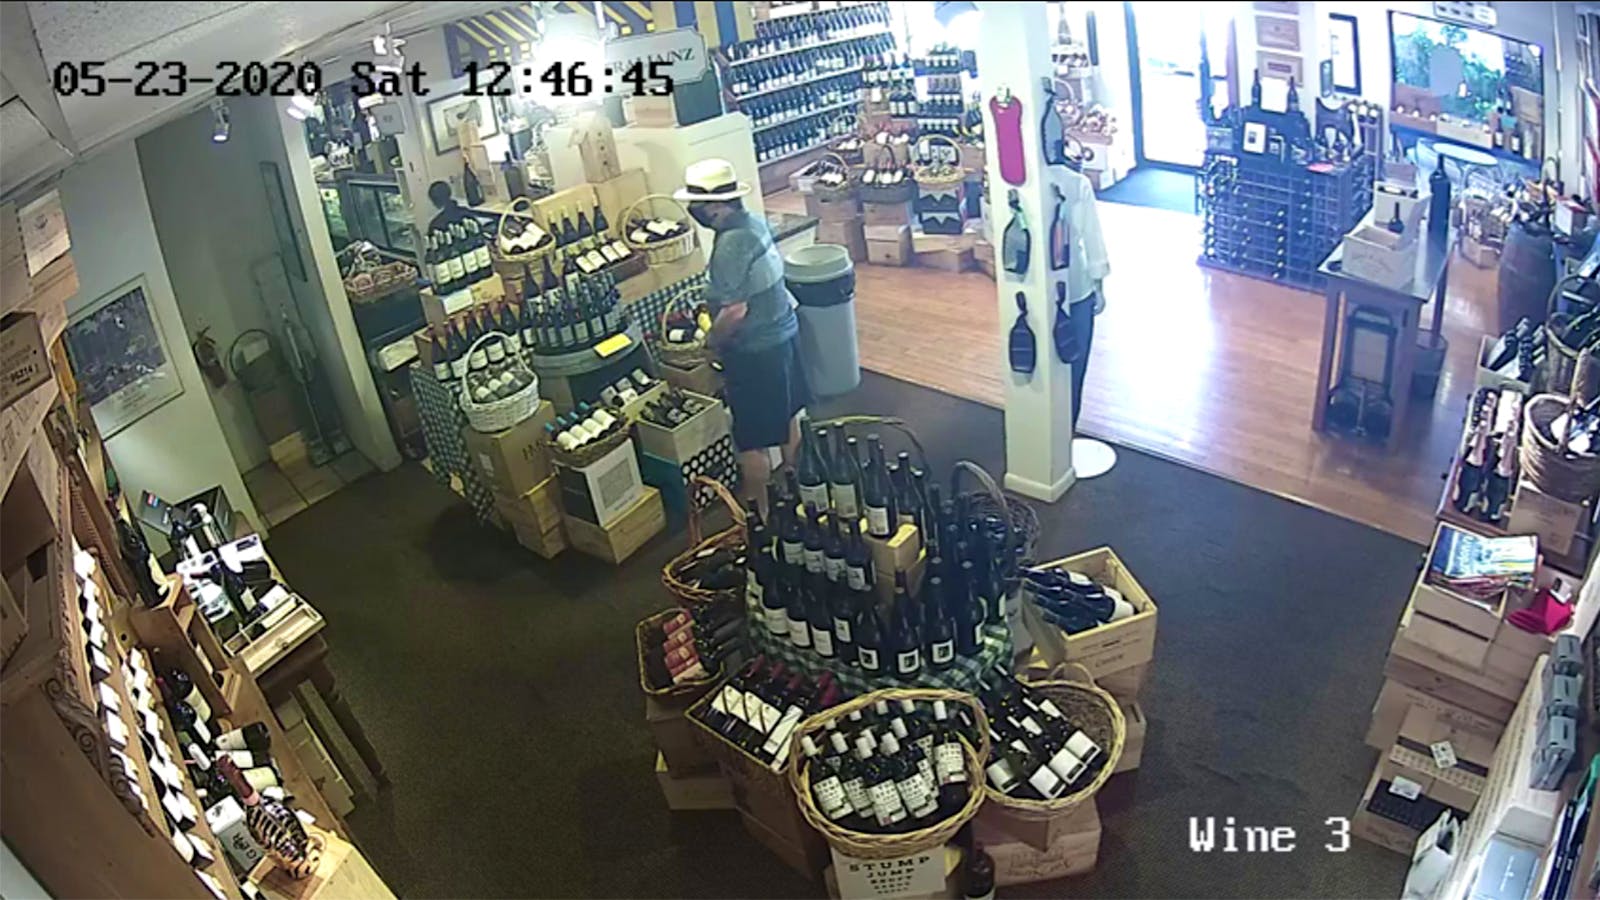 Florida Man Stuffs Wine down Pants in Local Winecrime Rampage